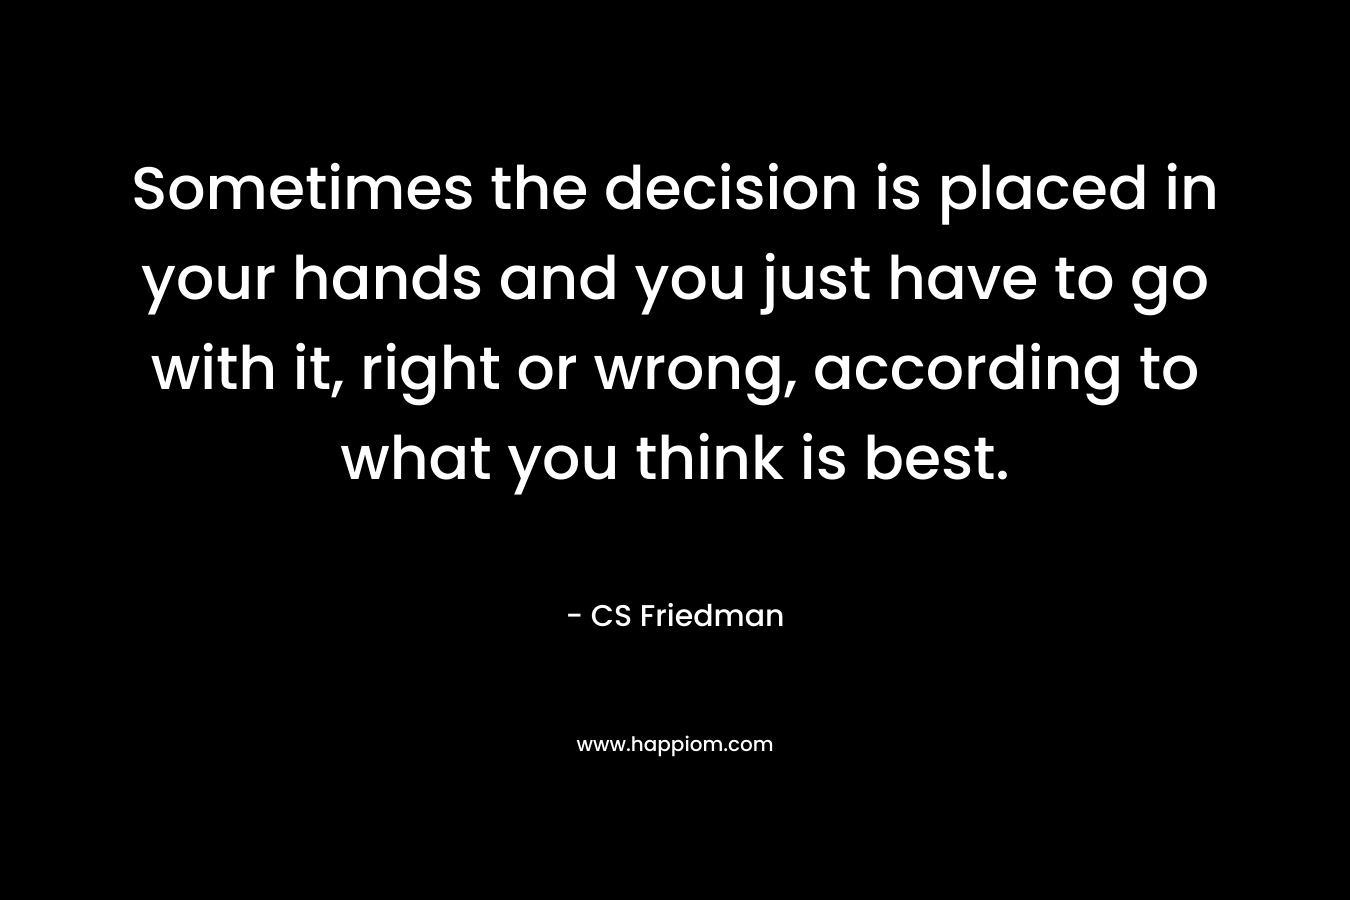 Sometimes the decision is placed in your hands and you just have to go with it, right or wrong, according to what you think is best. – CS Friedman